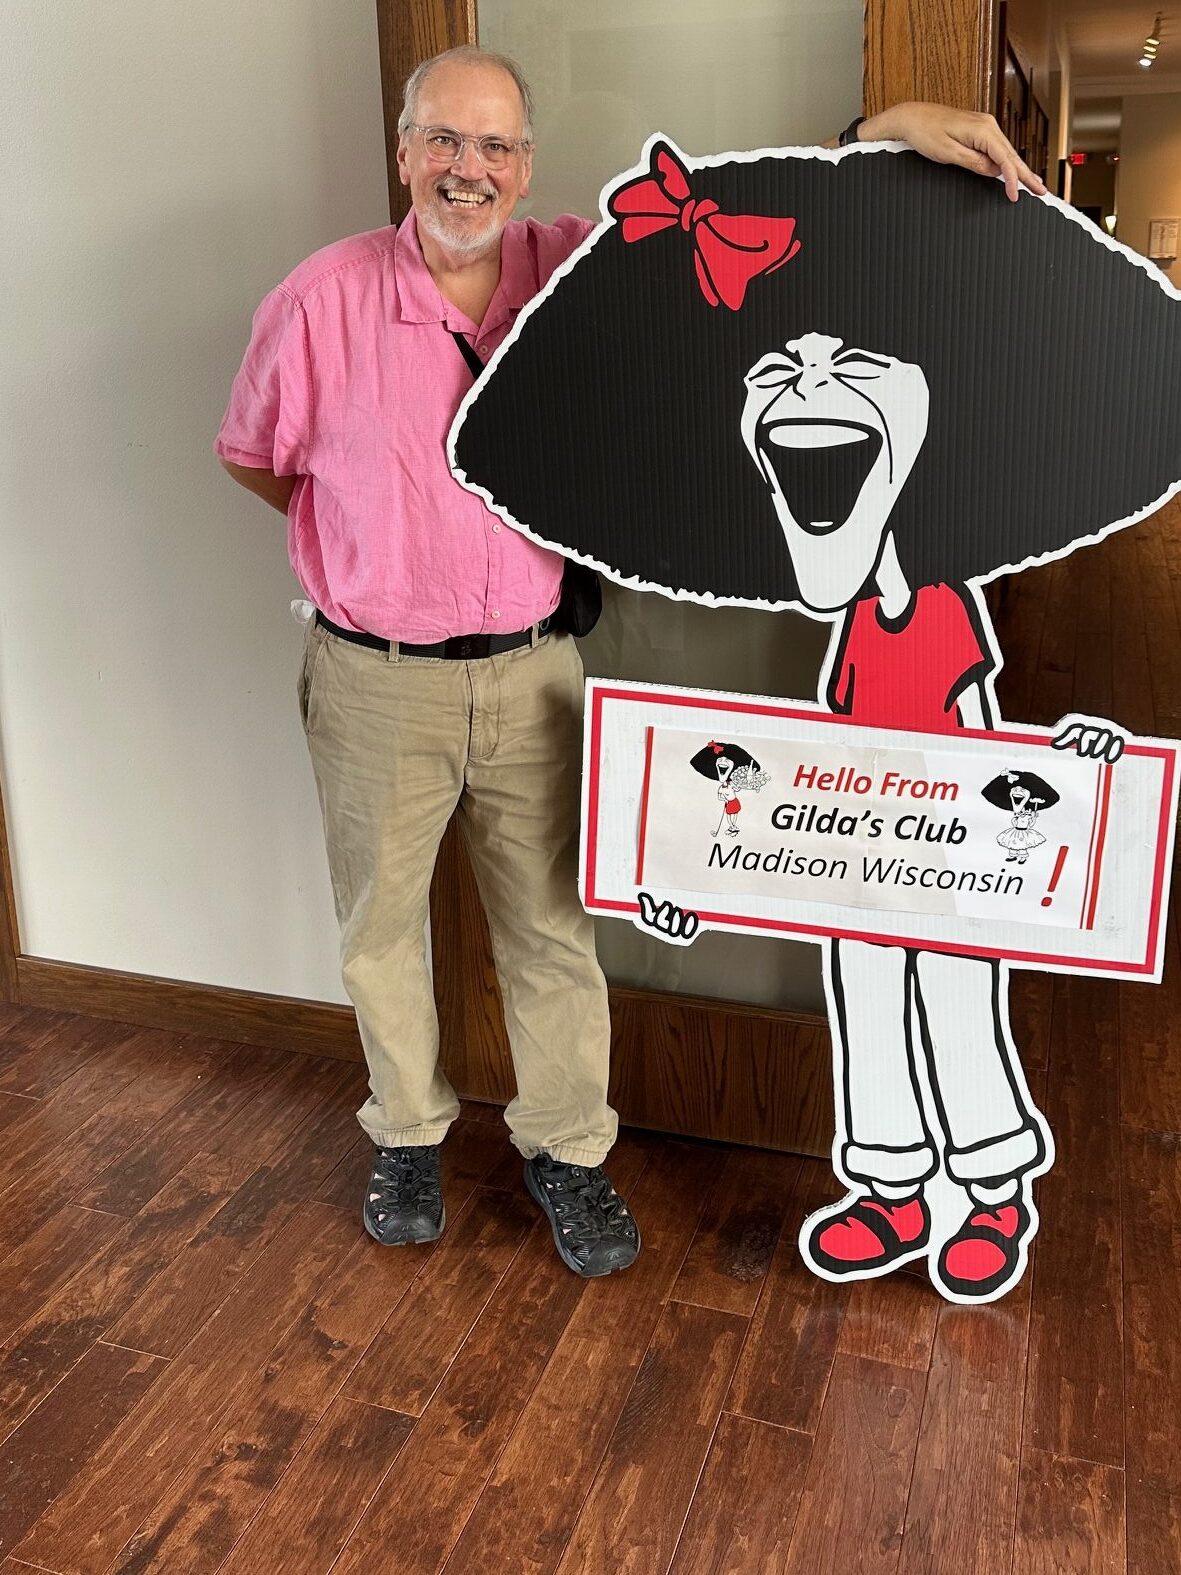 Ben standing next to a life size cutout cartoon of Gilda who is holding a sign that reads "Hello from Gilda's Club Madison Wisconsin!"